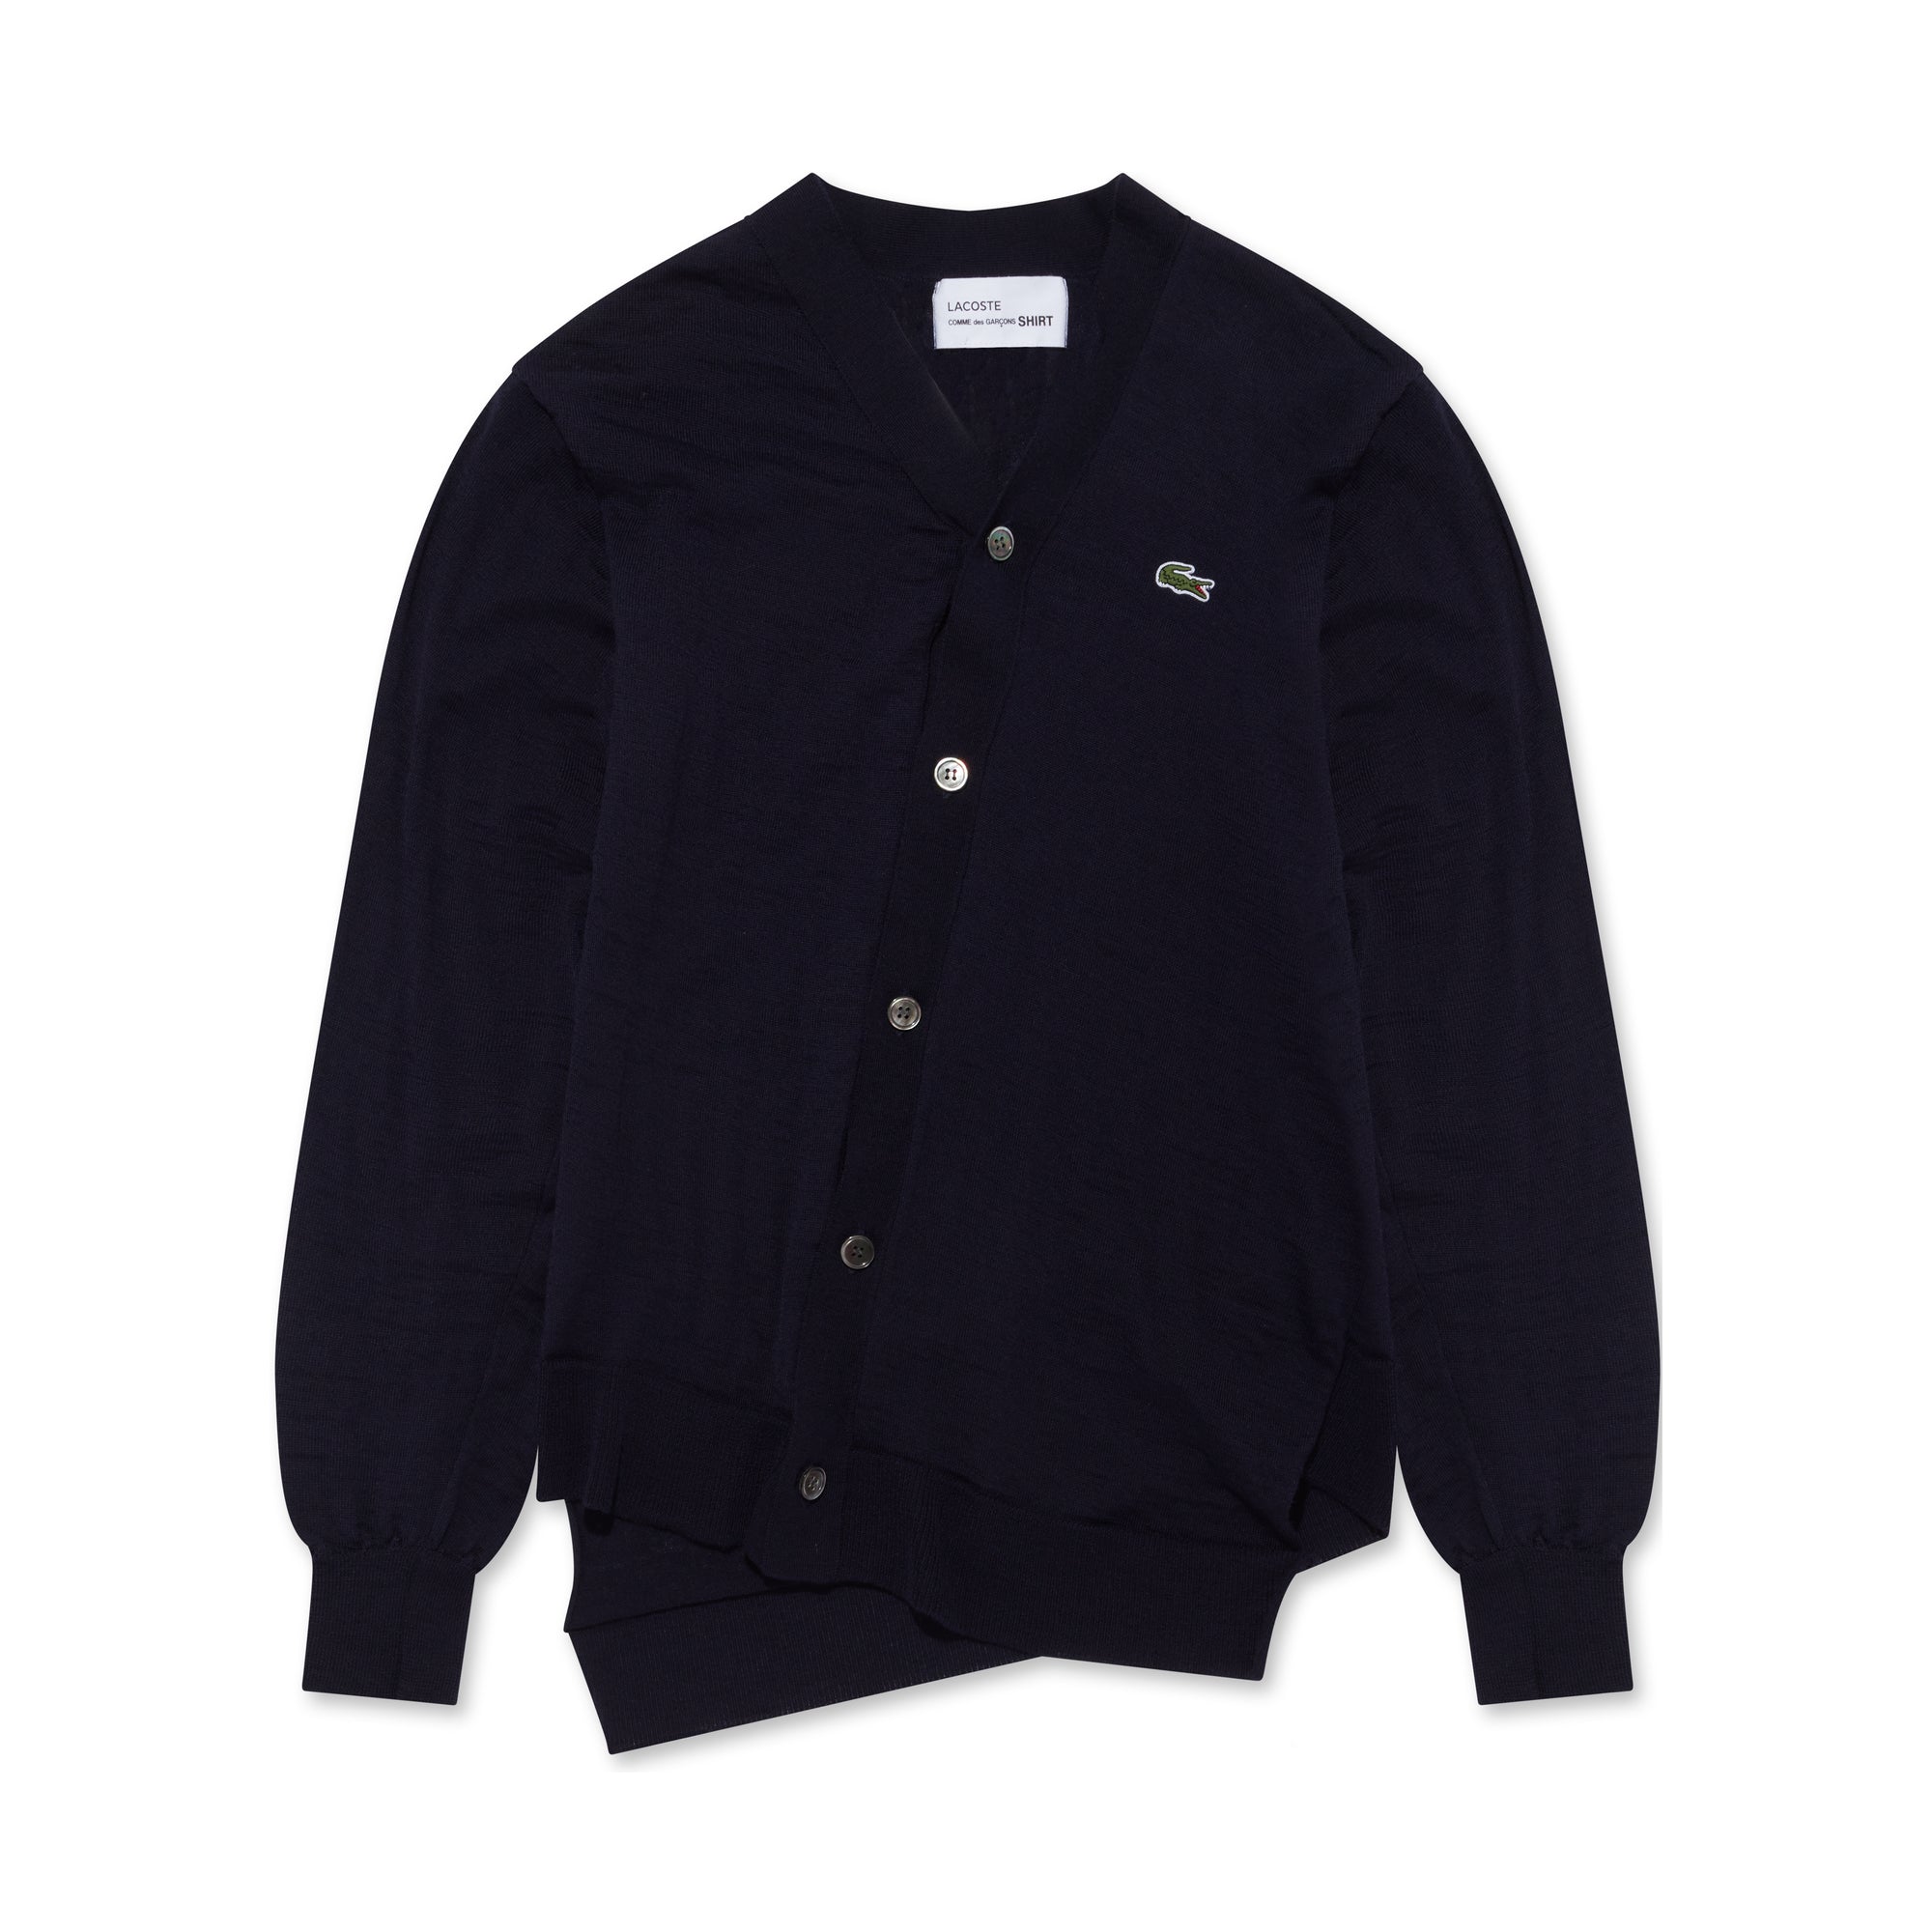 CDG Shirt - Lacoste Knit Cardigan - (Navy) view 5